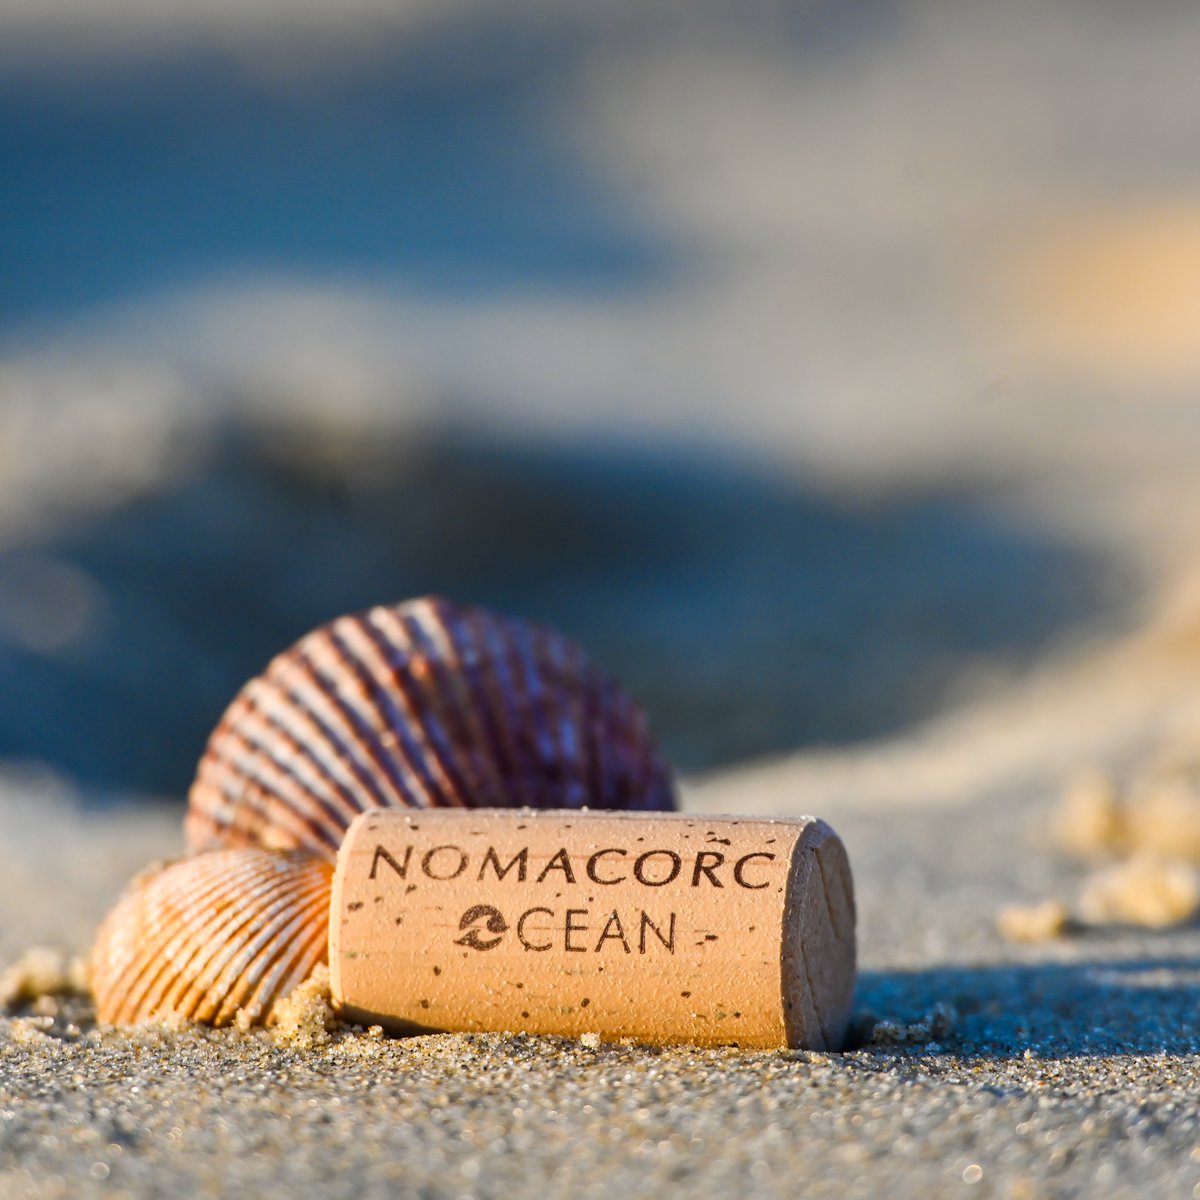 Happy #EarthDay! 🌍 Did you know? #Donnafugata is the first winery to use the Nomacorc Ocean, made from OBP collected from coastal areas. A partnership with @Vinventions that reflects our commitment to environmental #sustainability. @SeagreenWench @nanowellbeing @Dan_Lerner